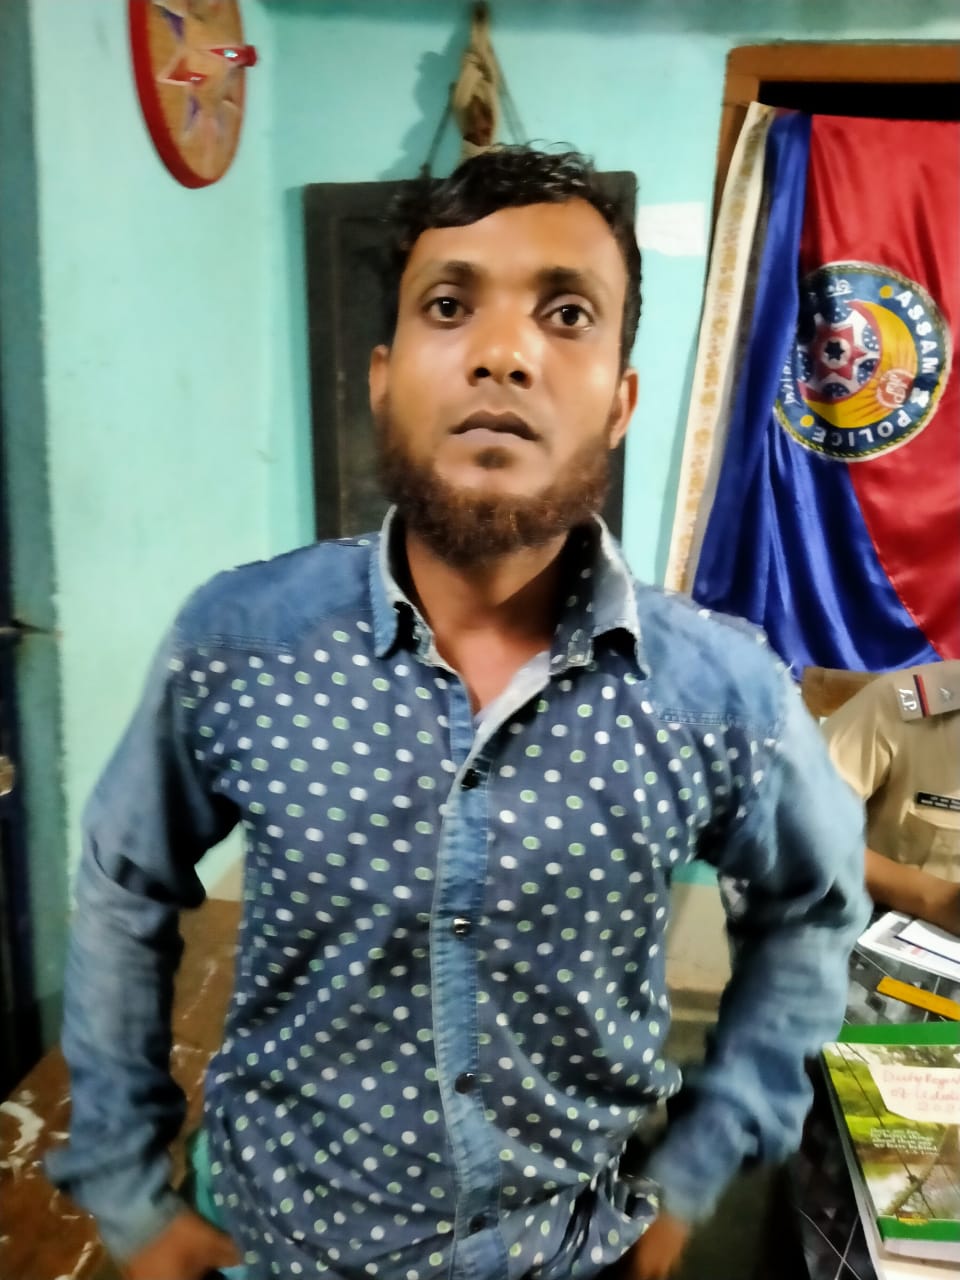 Udali police arrested the 5th man who is convicted of beheading a cow